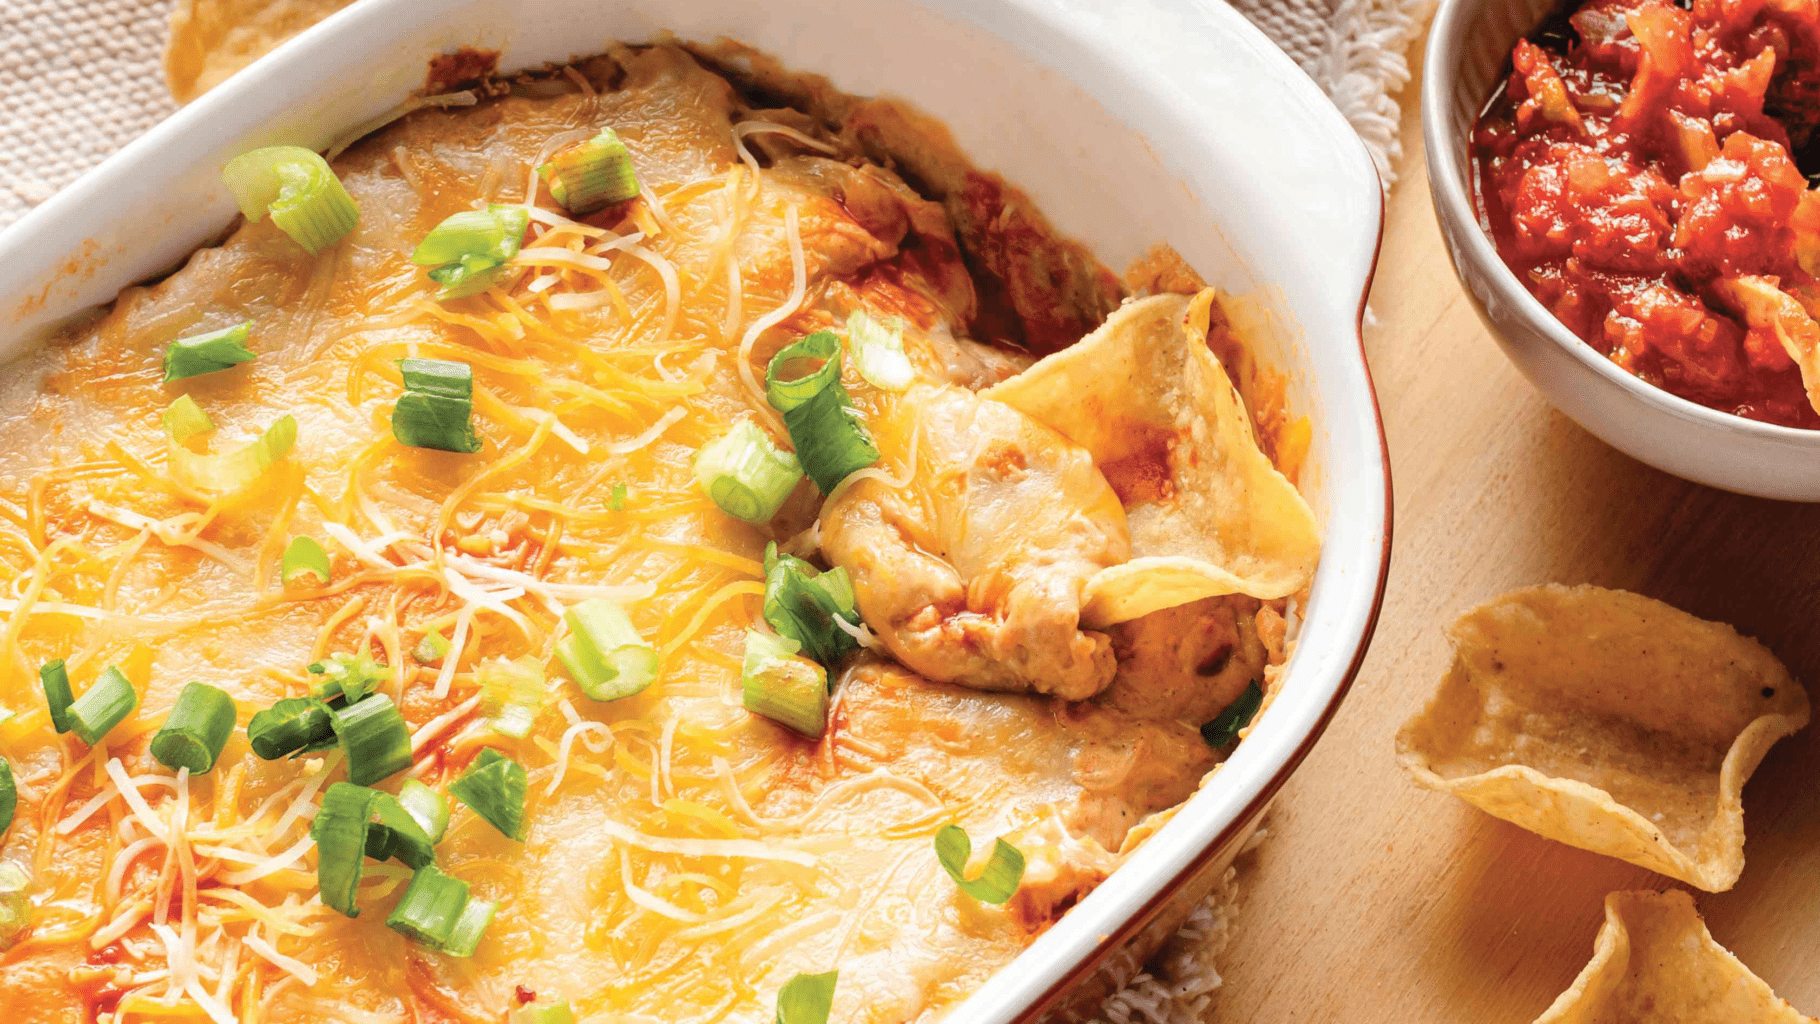 Cheesey Baked Bean Dip excerpted from Just Eat by Jessie James Decker.